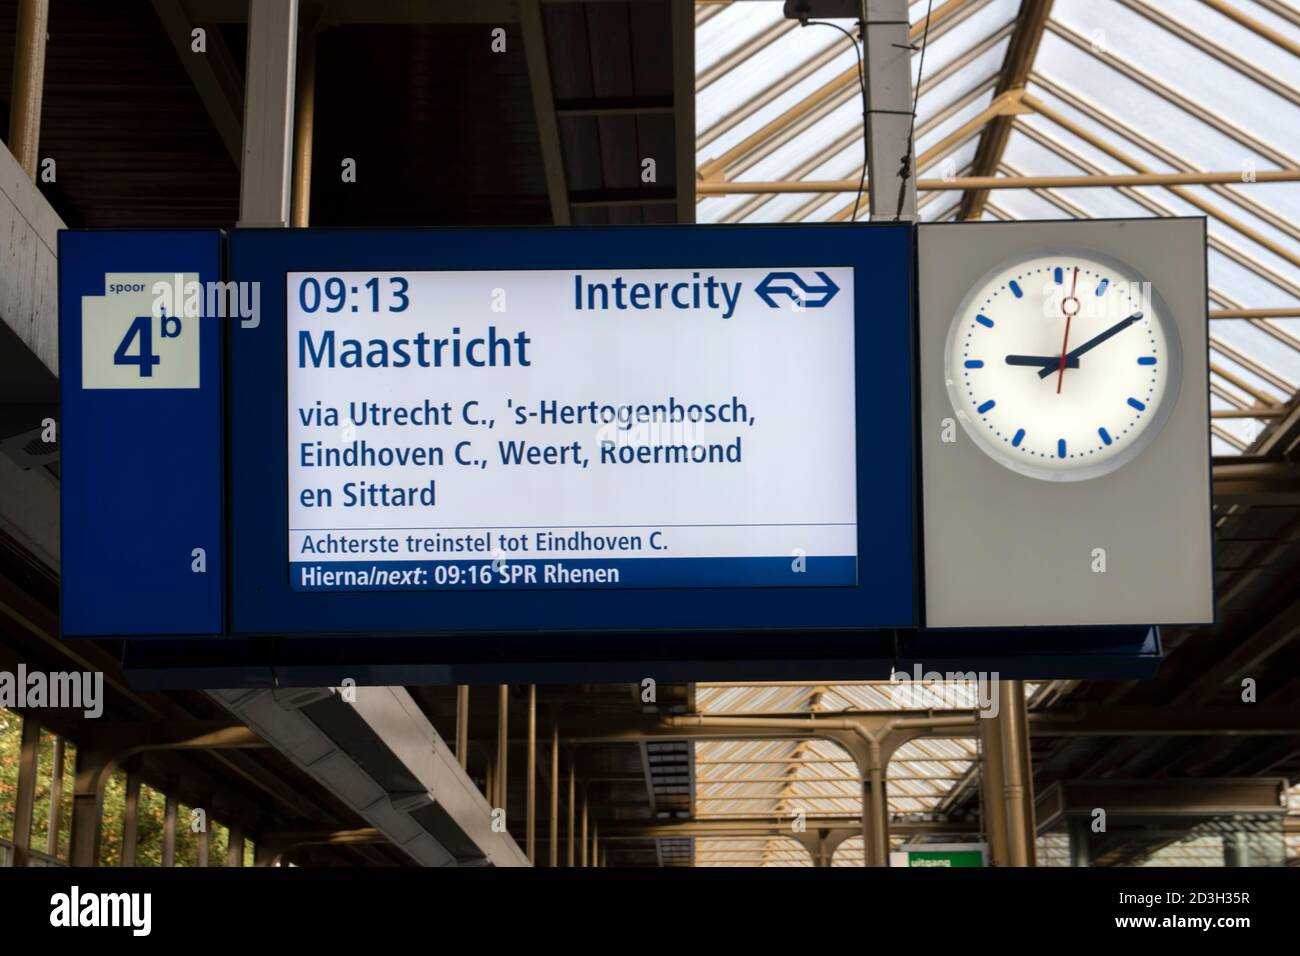 Monitor On A Train Platform At The Amstel Station Amsterdam The Netherlands 25-9-2020 Stock Photo